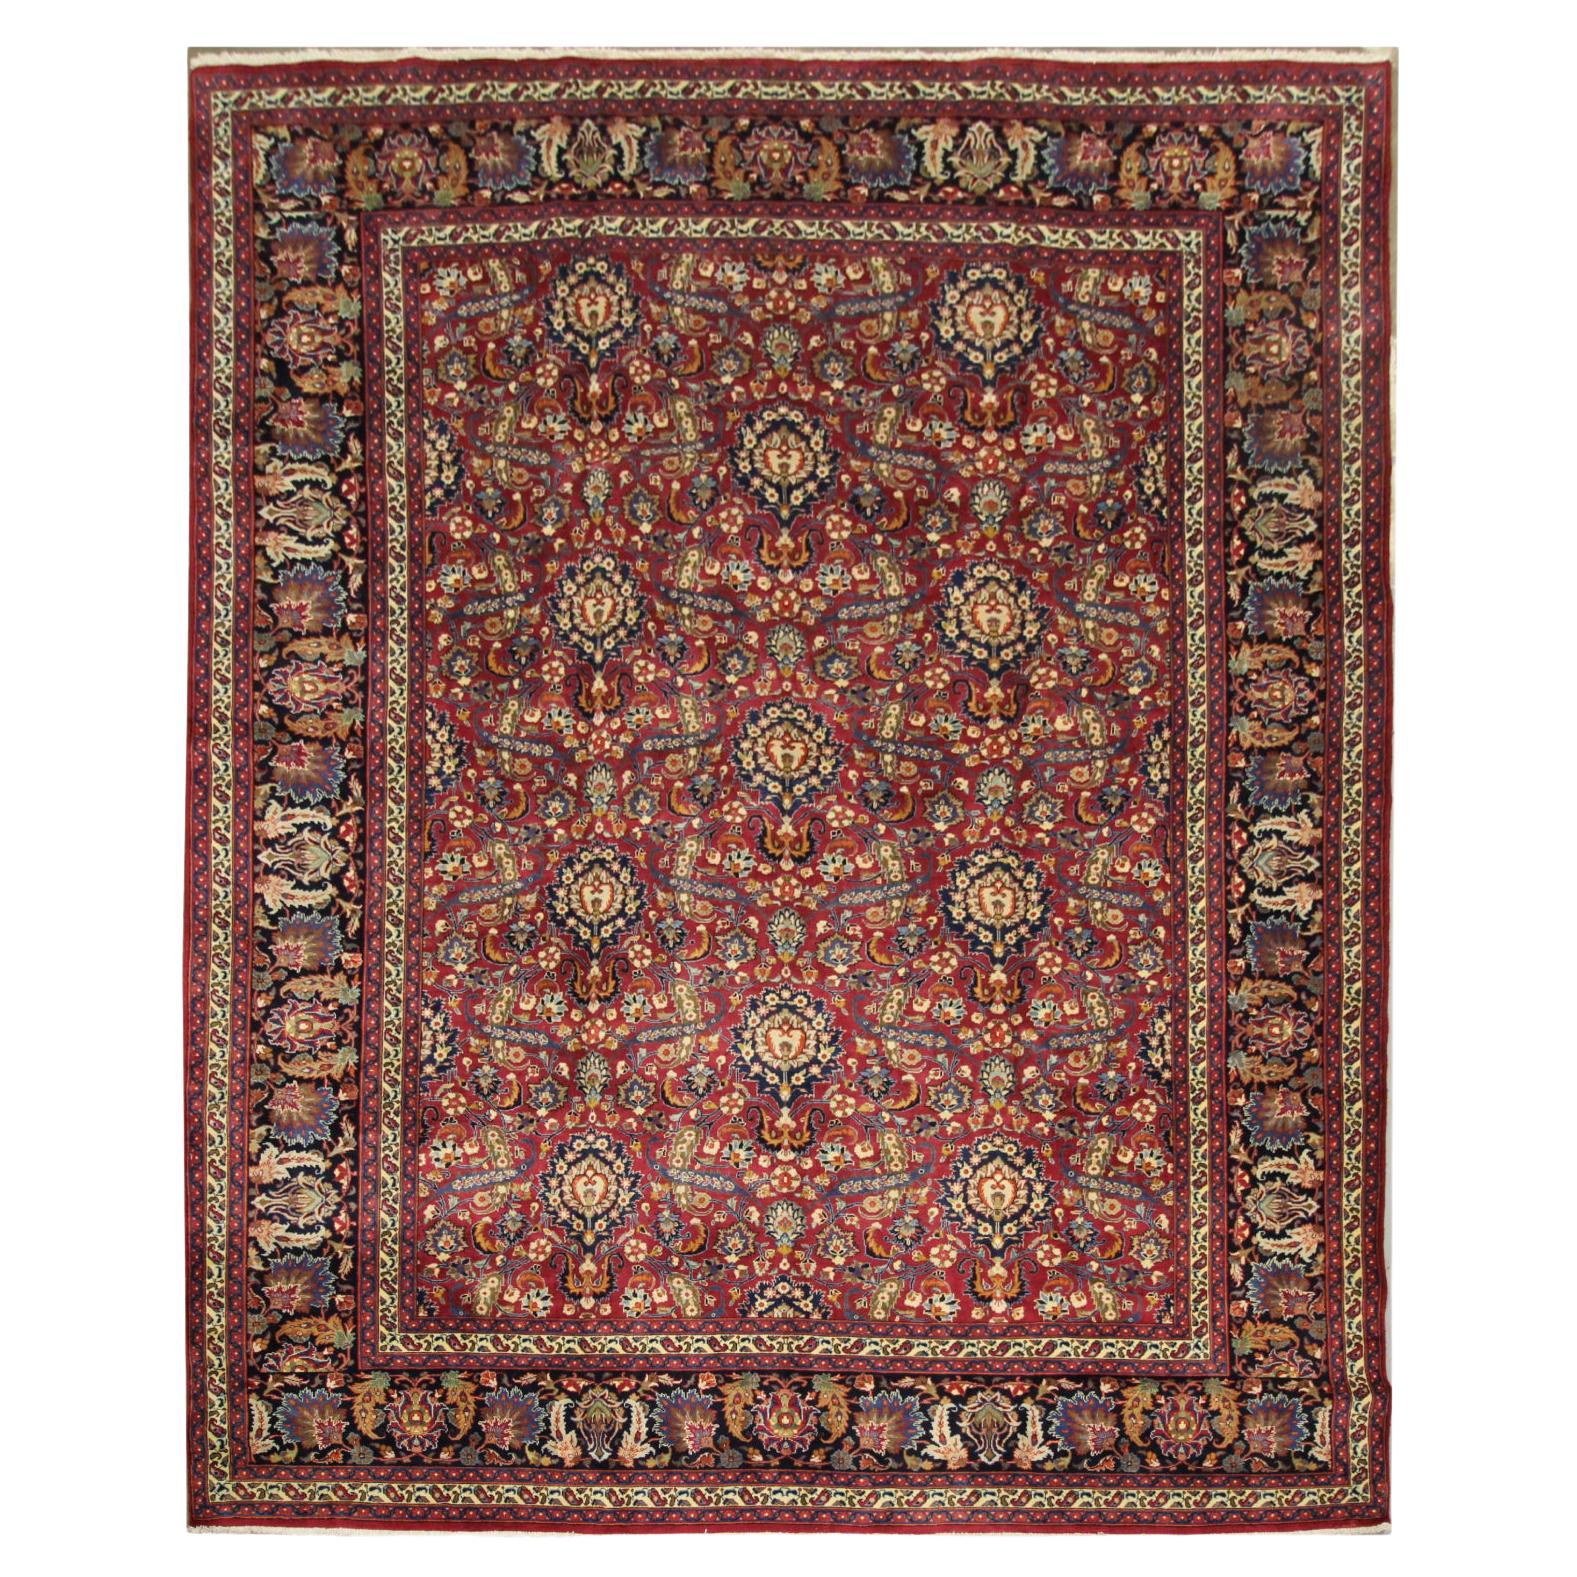 Antique Rugs Crimson Red Handmade Carpet, All over Turkish Rugs for Sale For Sale